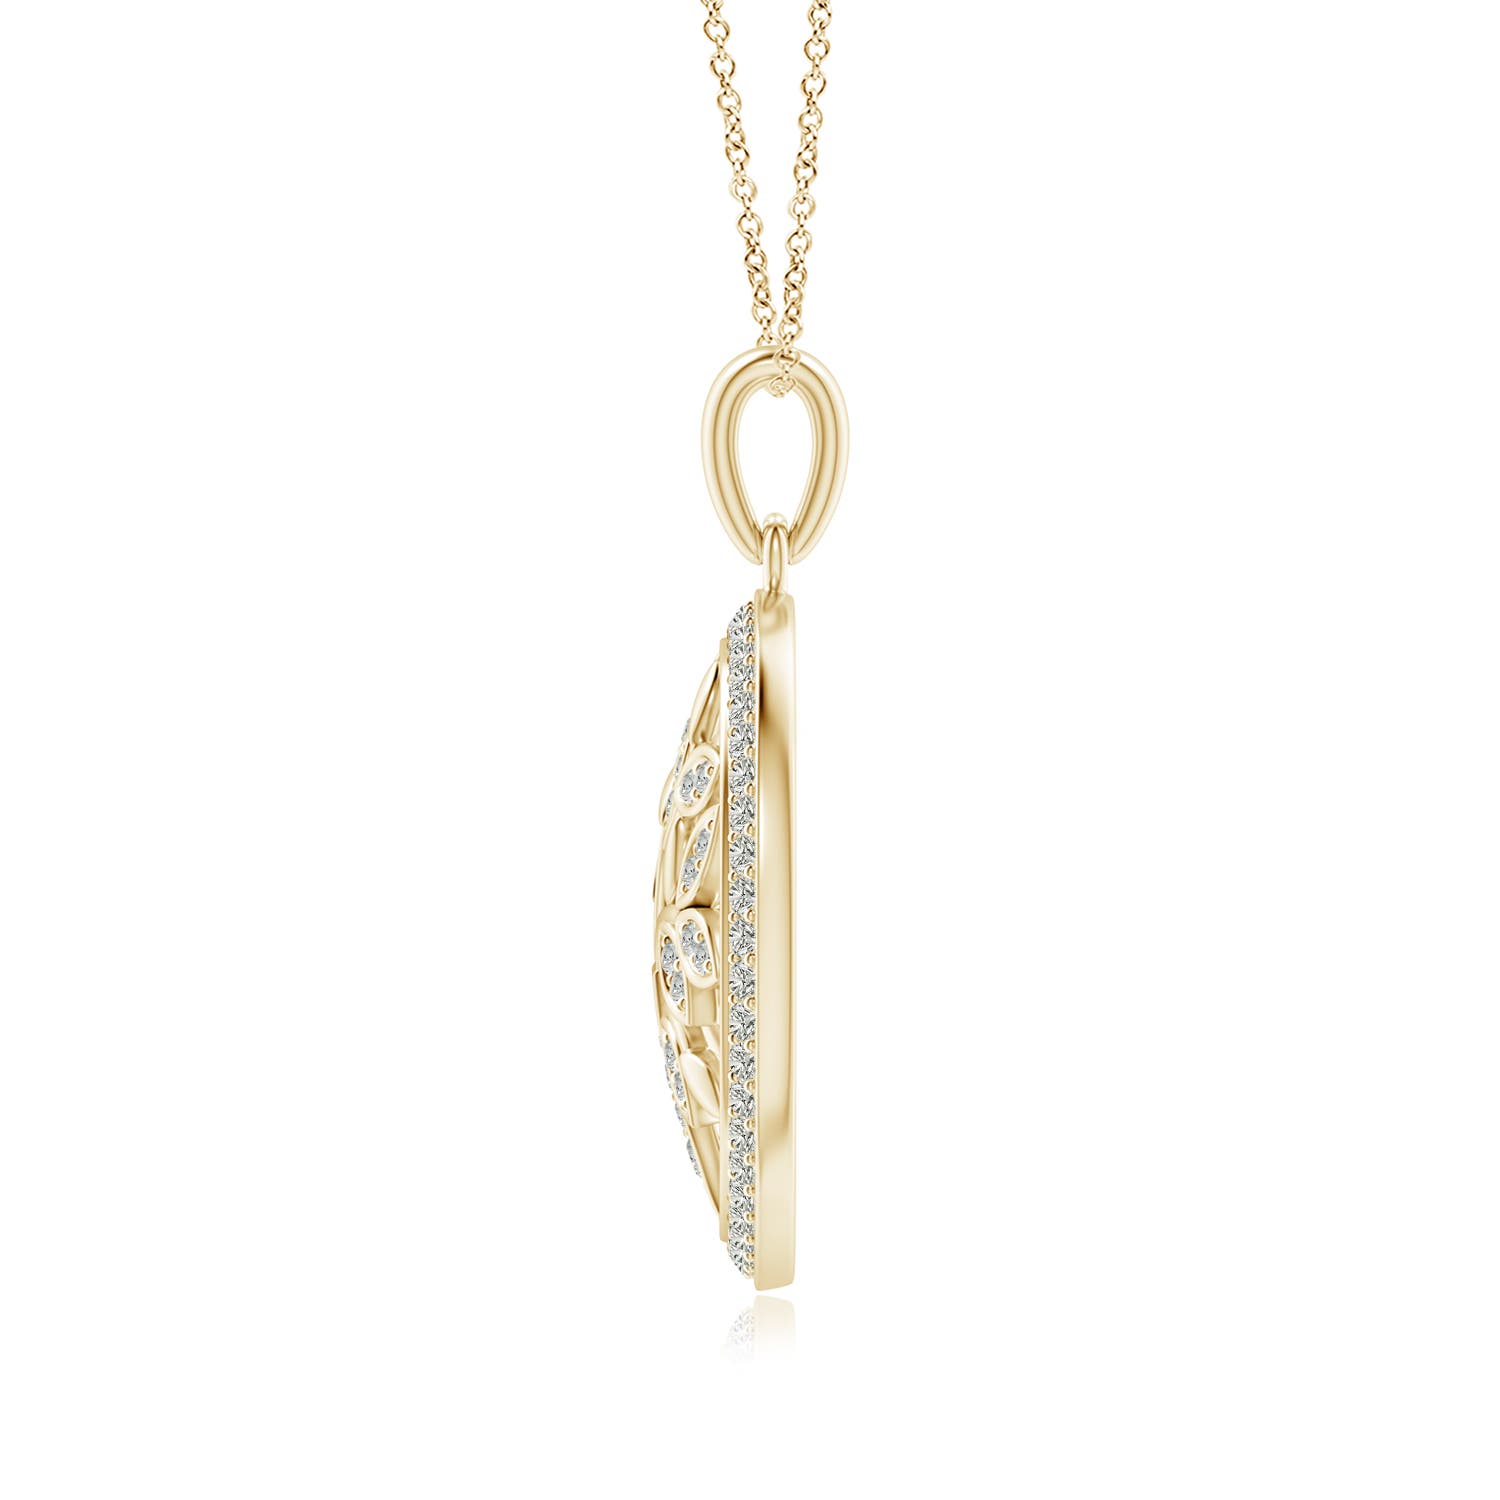 K, I3 / 0.4 CT / 14 KT Yellow Gold